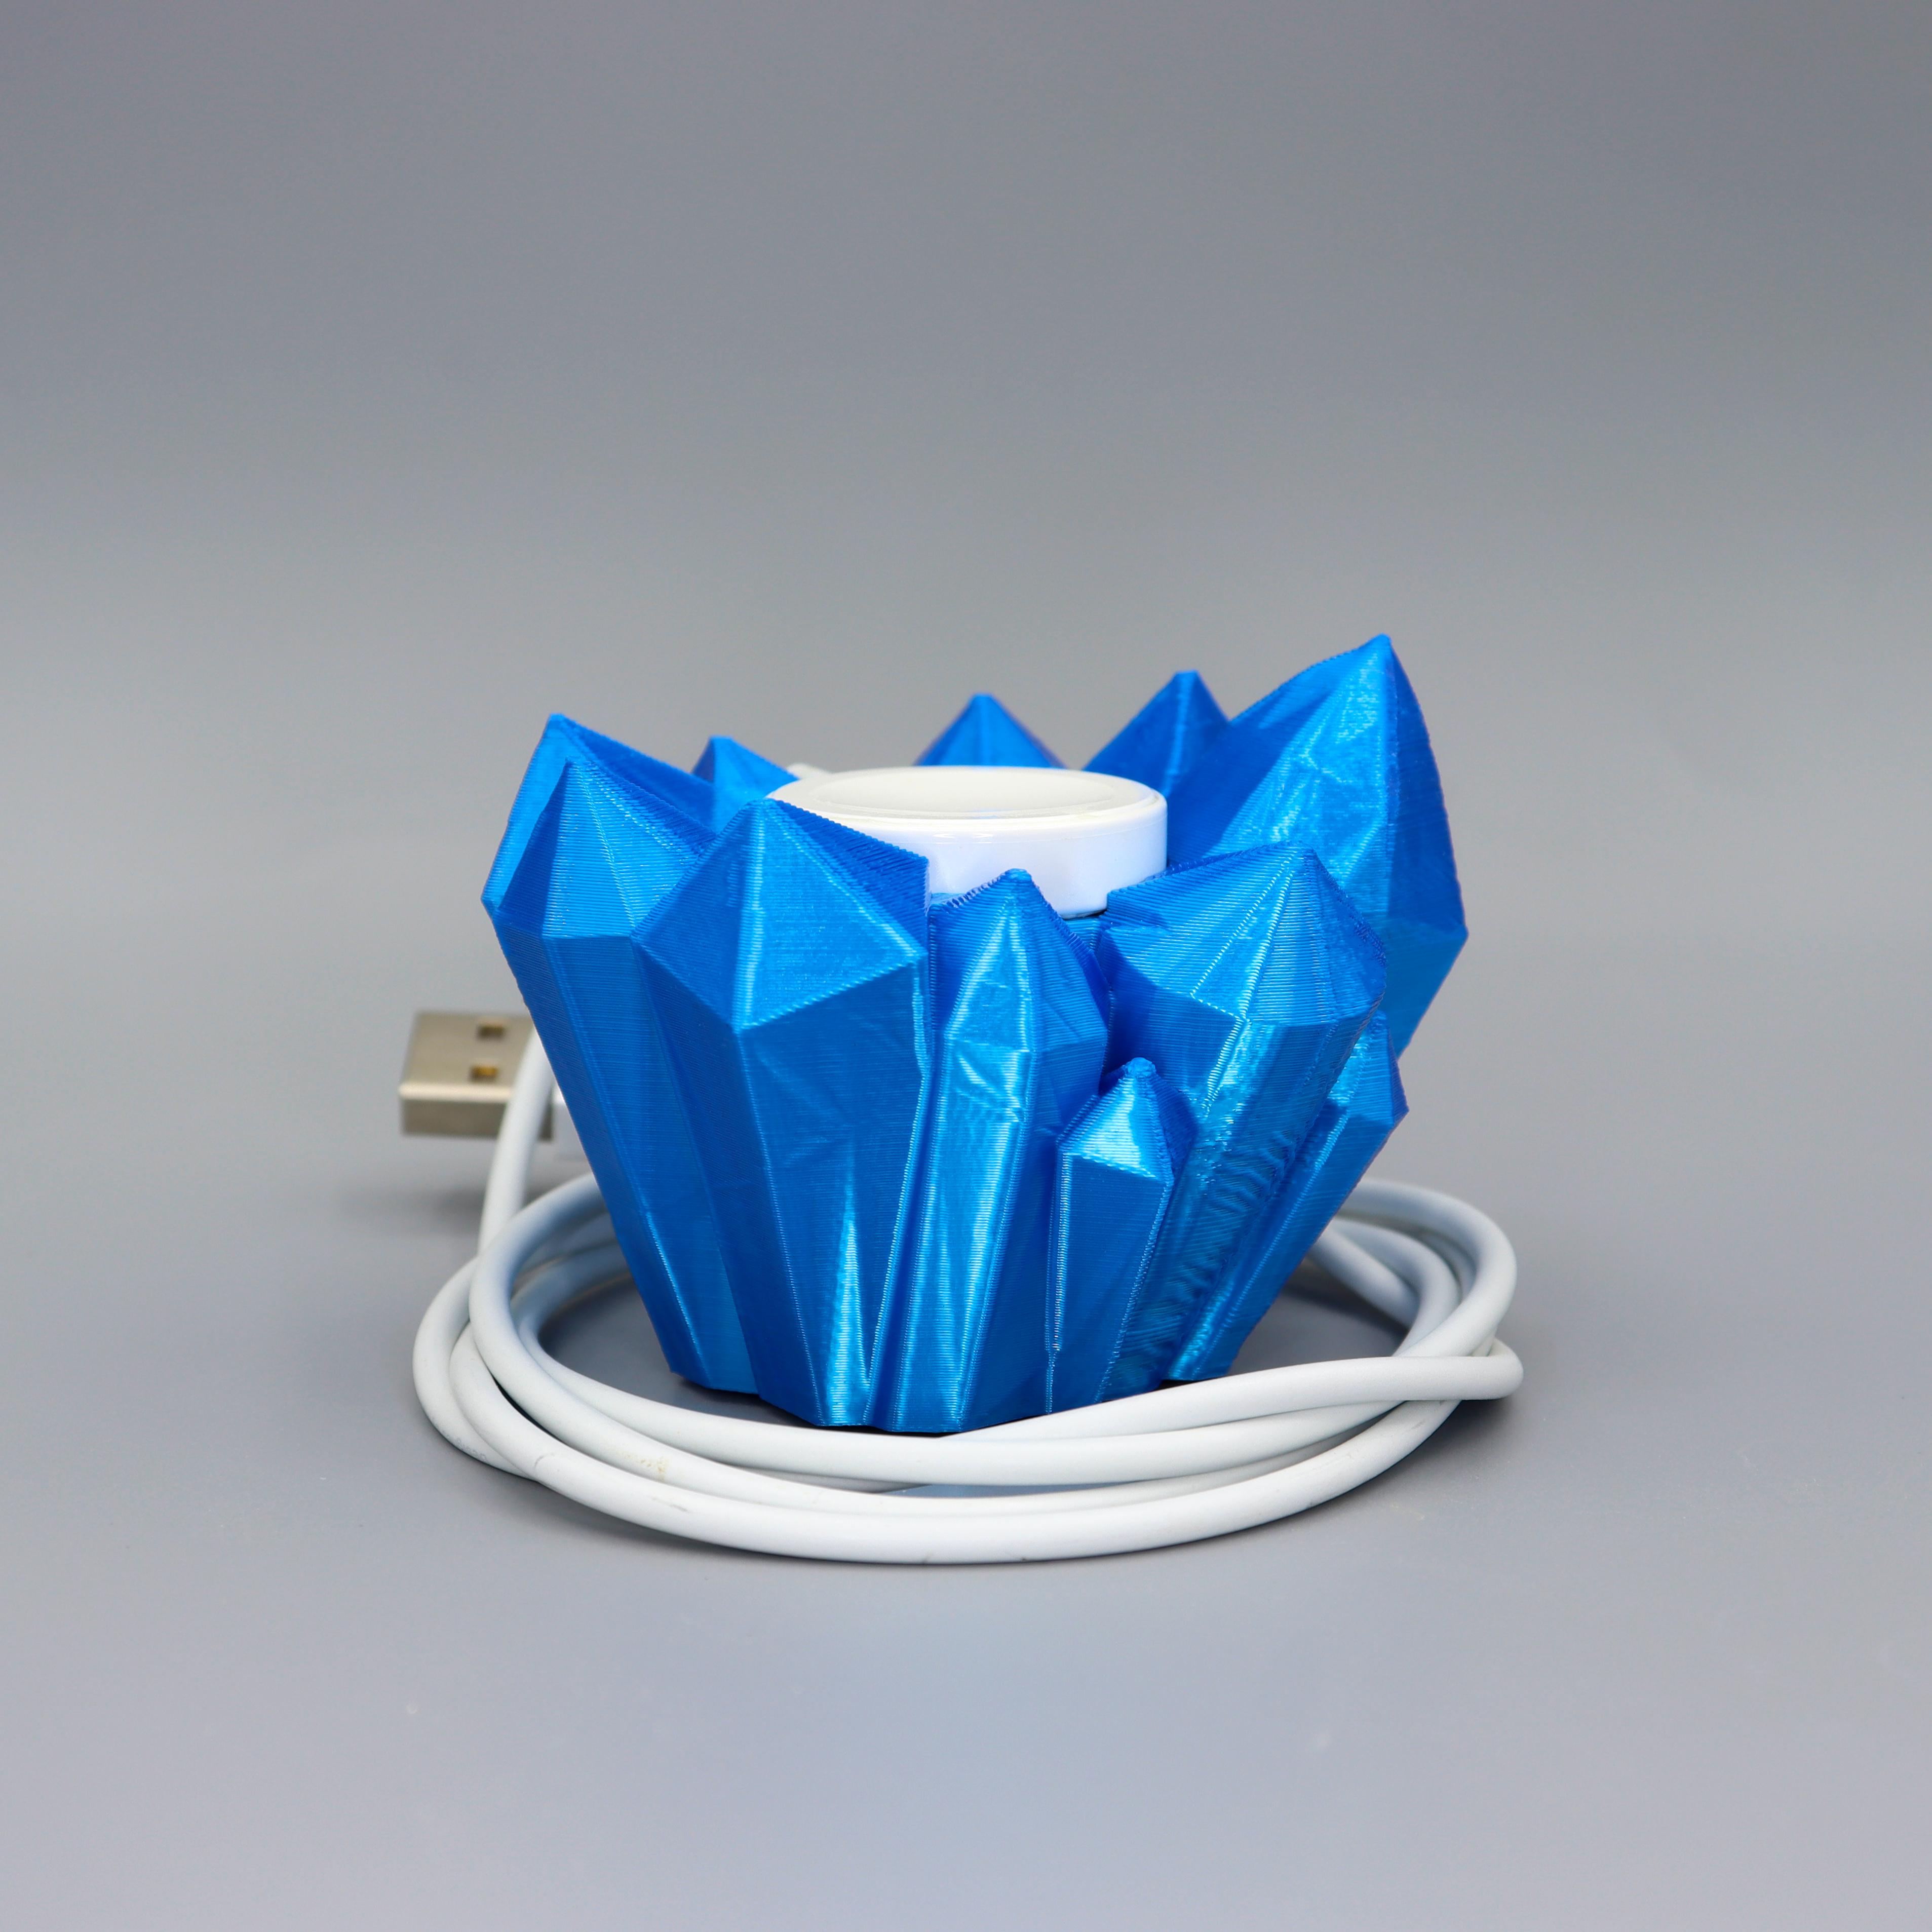 Watch charger crystal 3d model